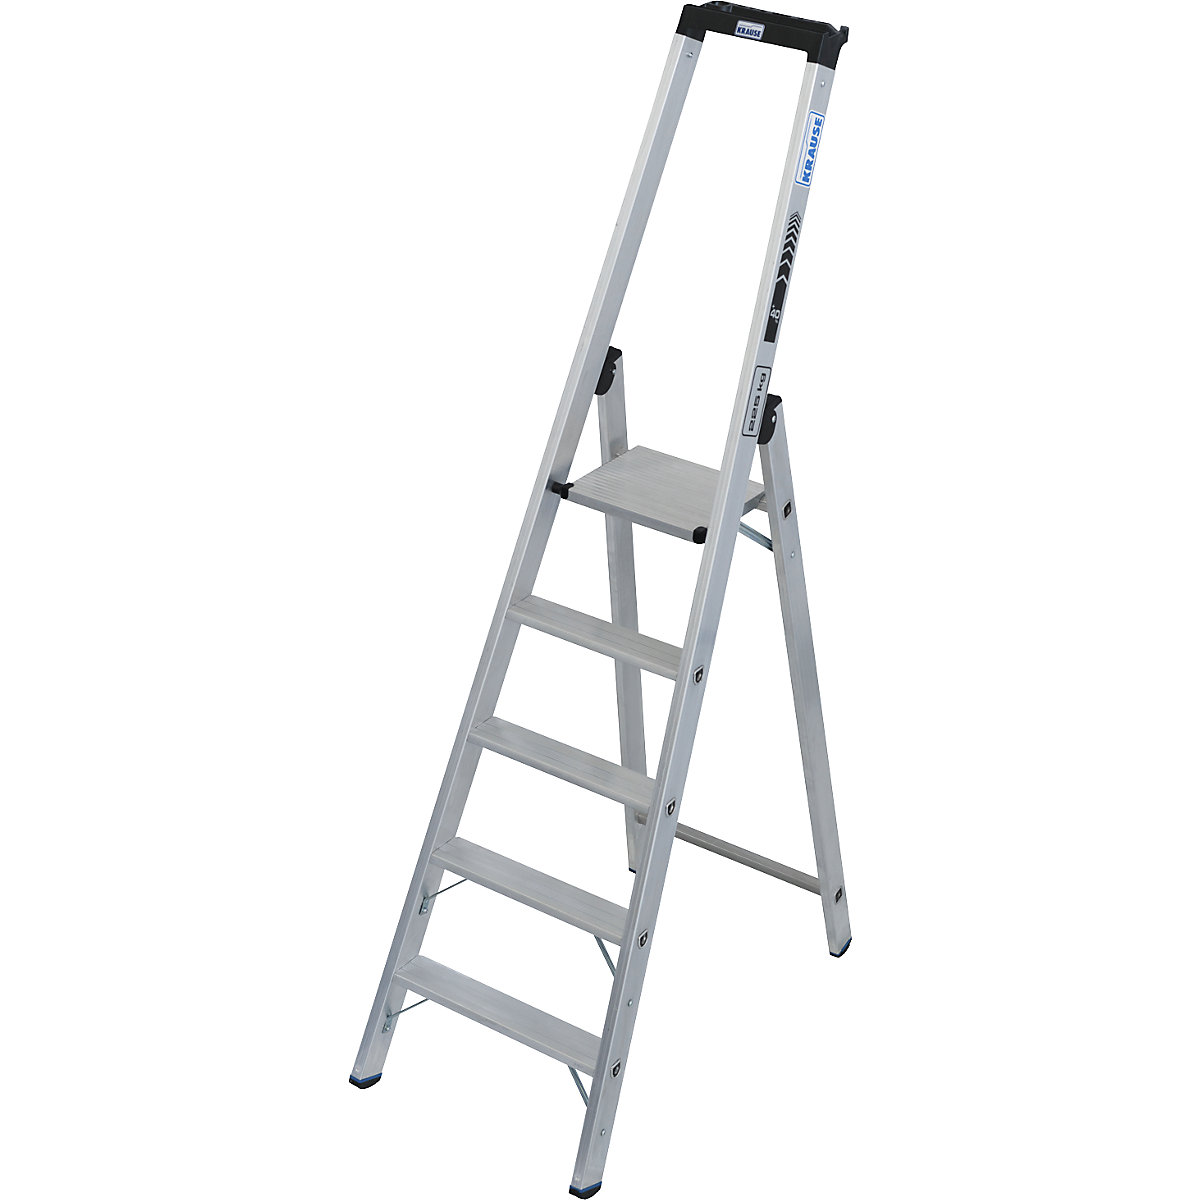 Heavy duty step ladder – KRAUSE, single sided access, up to 225 kg, 5 steps incl. platform-1